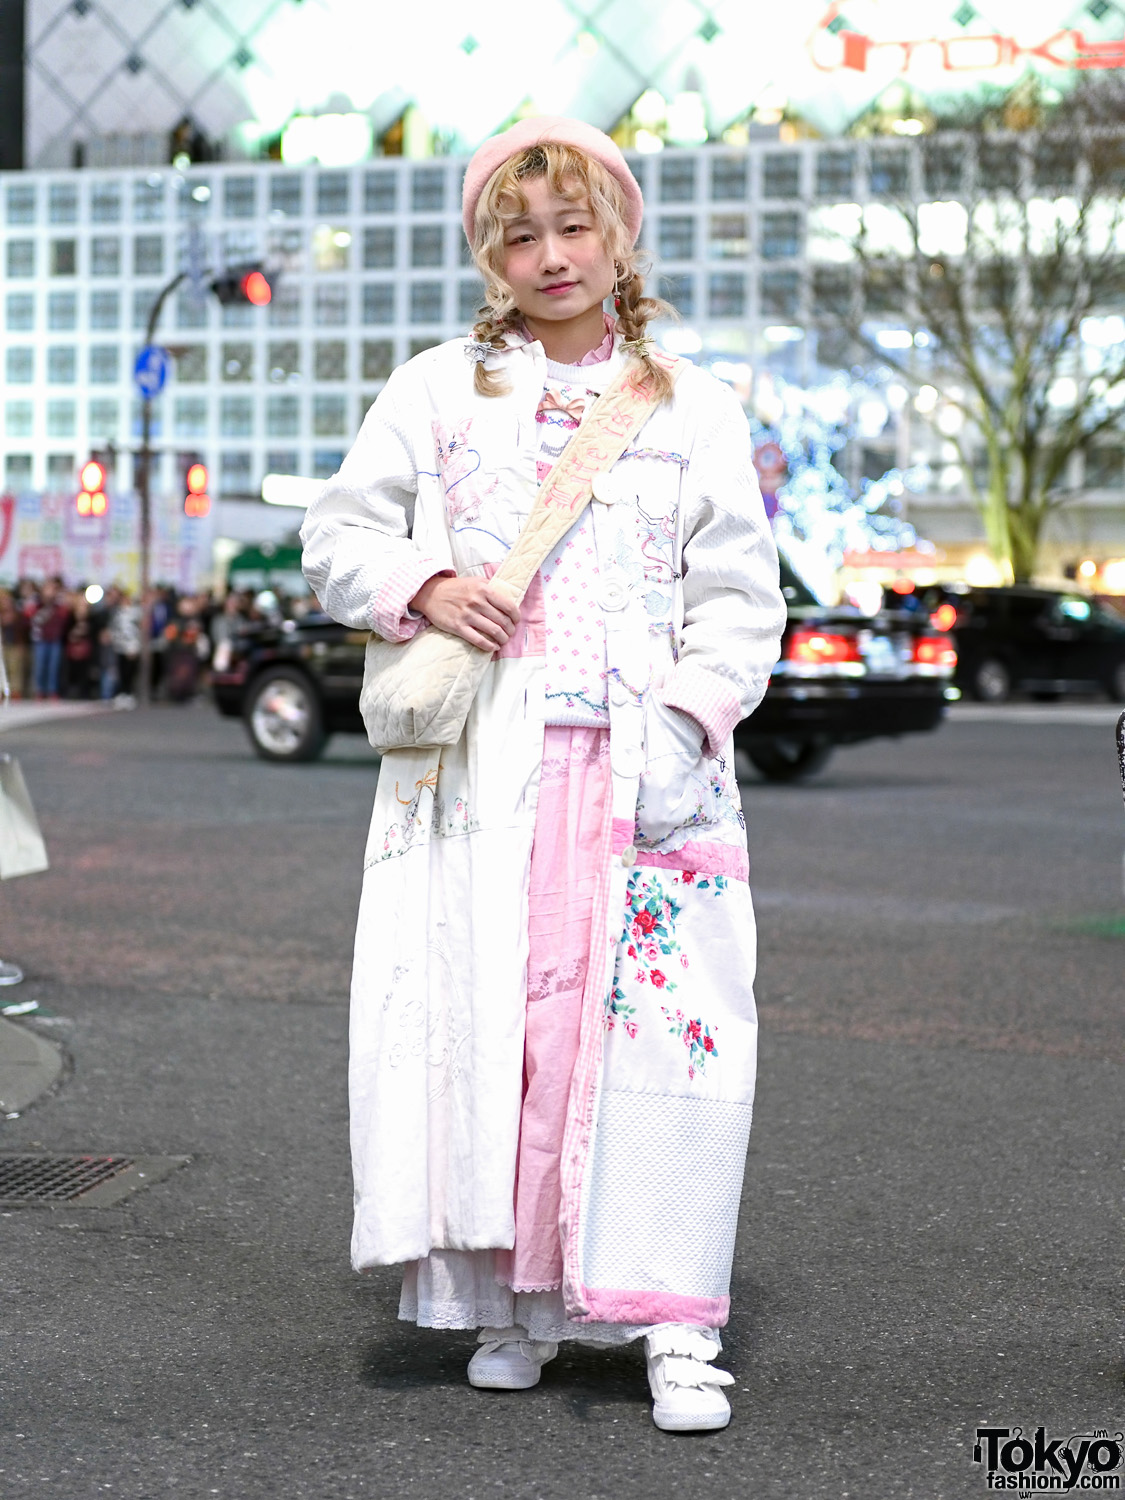 Vintage Pastel Street Style in Shibuya w/ Long Quilted Coat, Knit Sweater, Ruffle Dress, Velcro Sneakers & Sling Bag